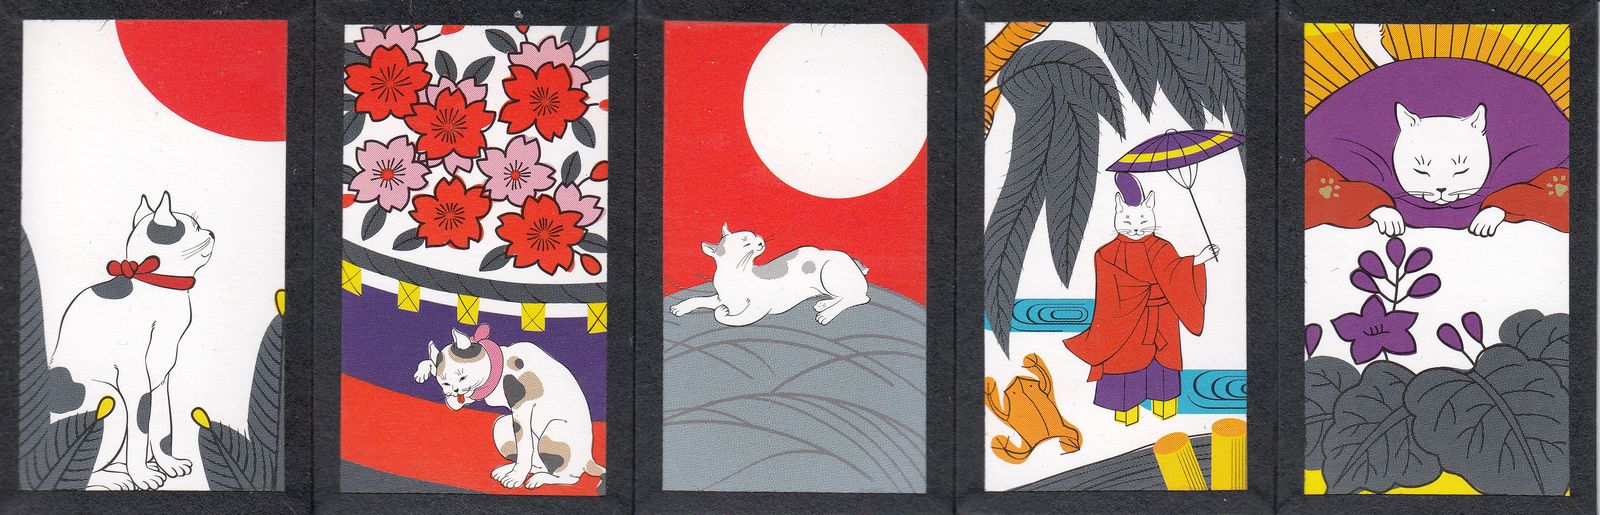 Hanafuda cards with Japanese cats on them.